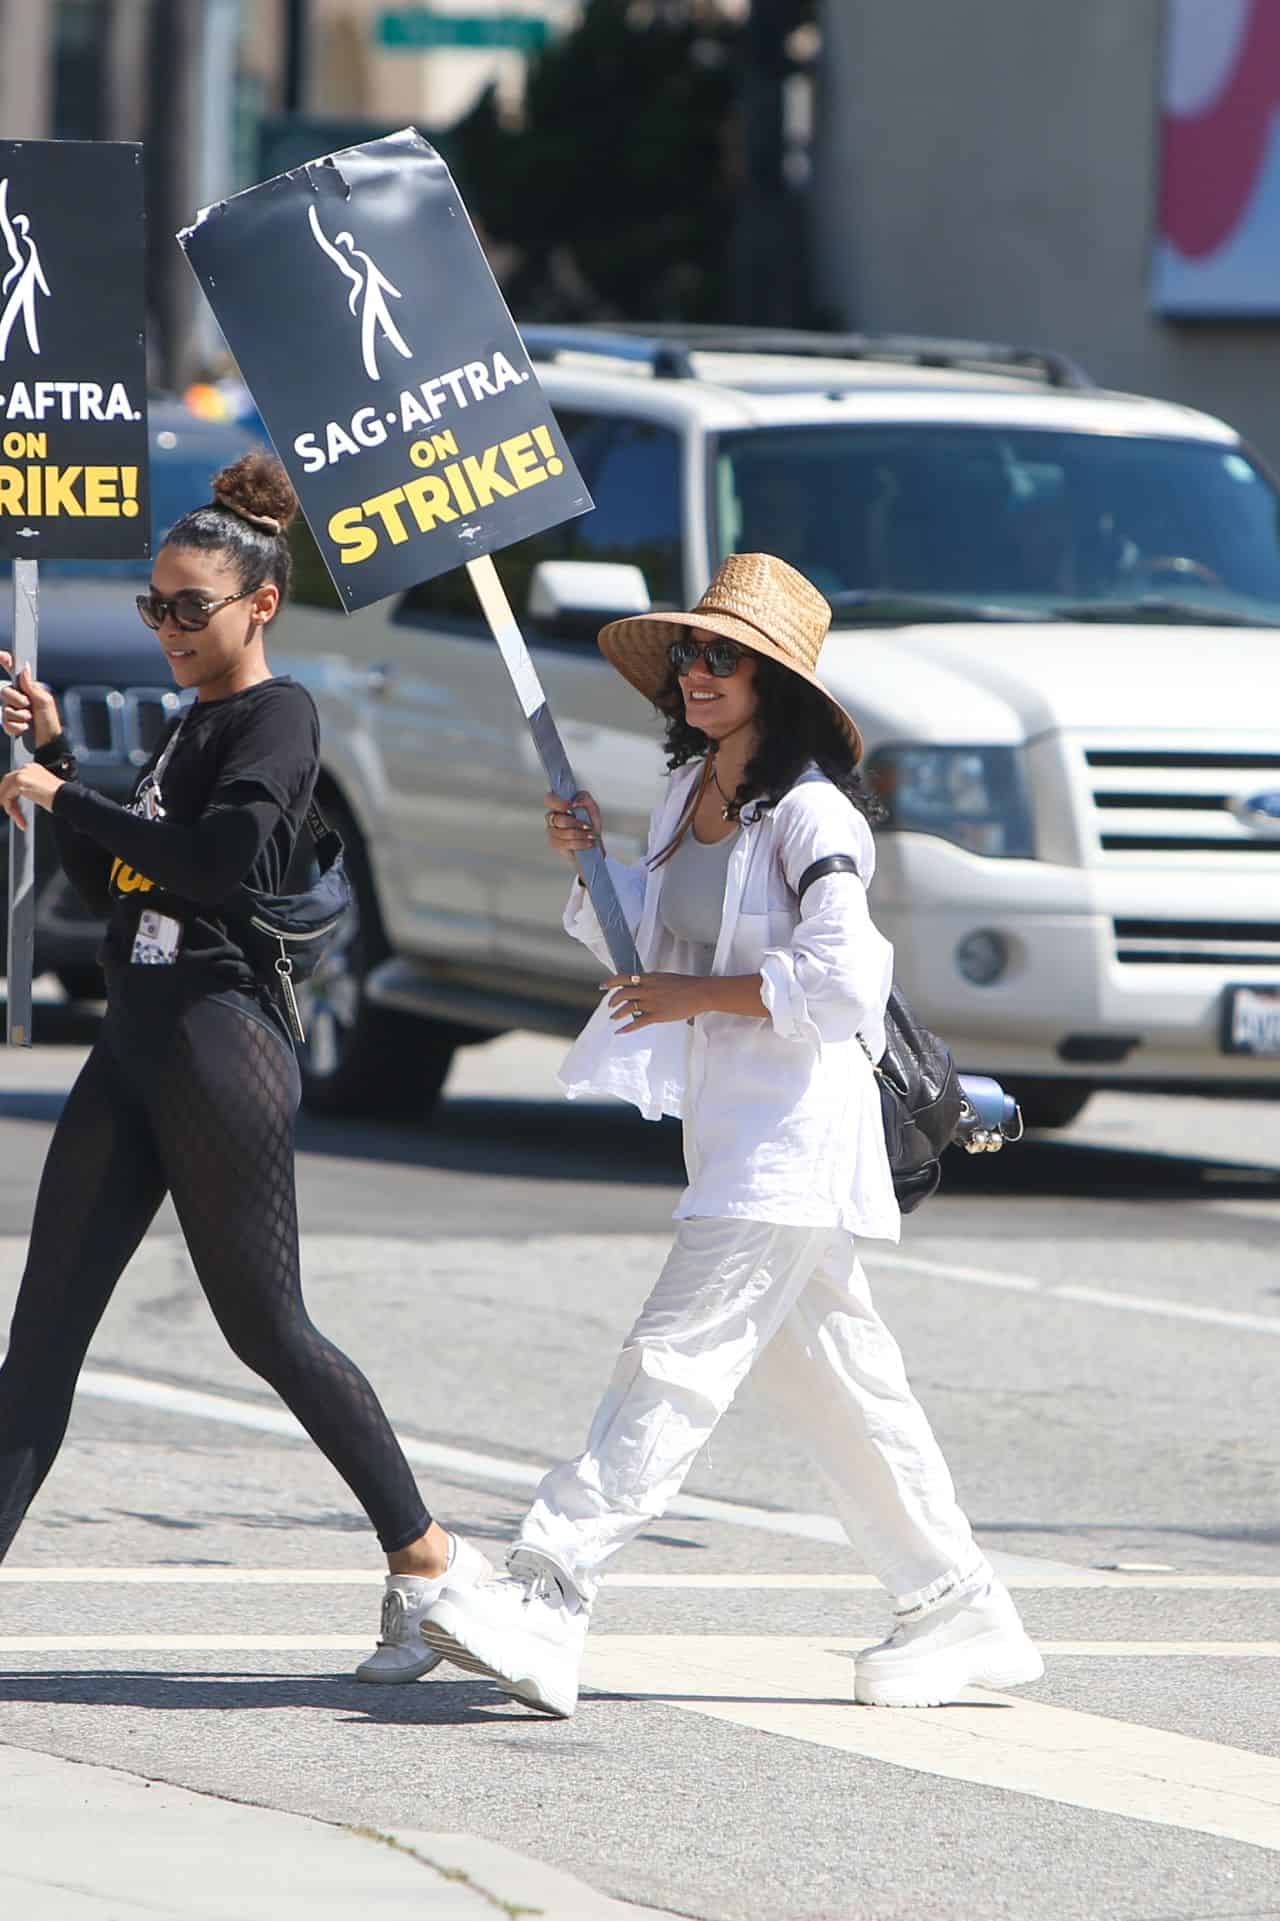 Vanessa Hudgens Joins SAG-AFTRA Strike in Chic All-White Outfit